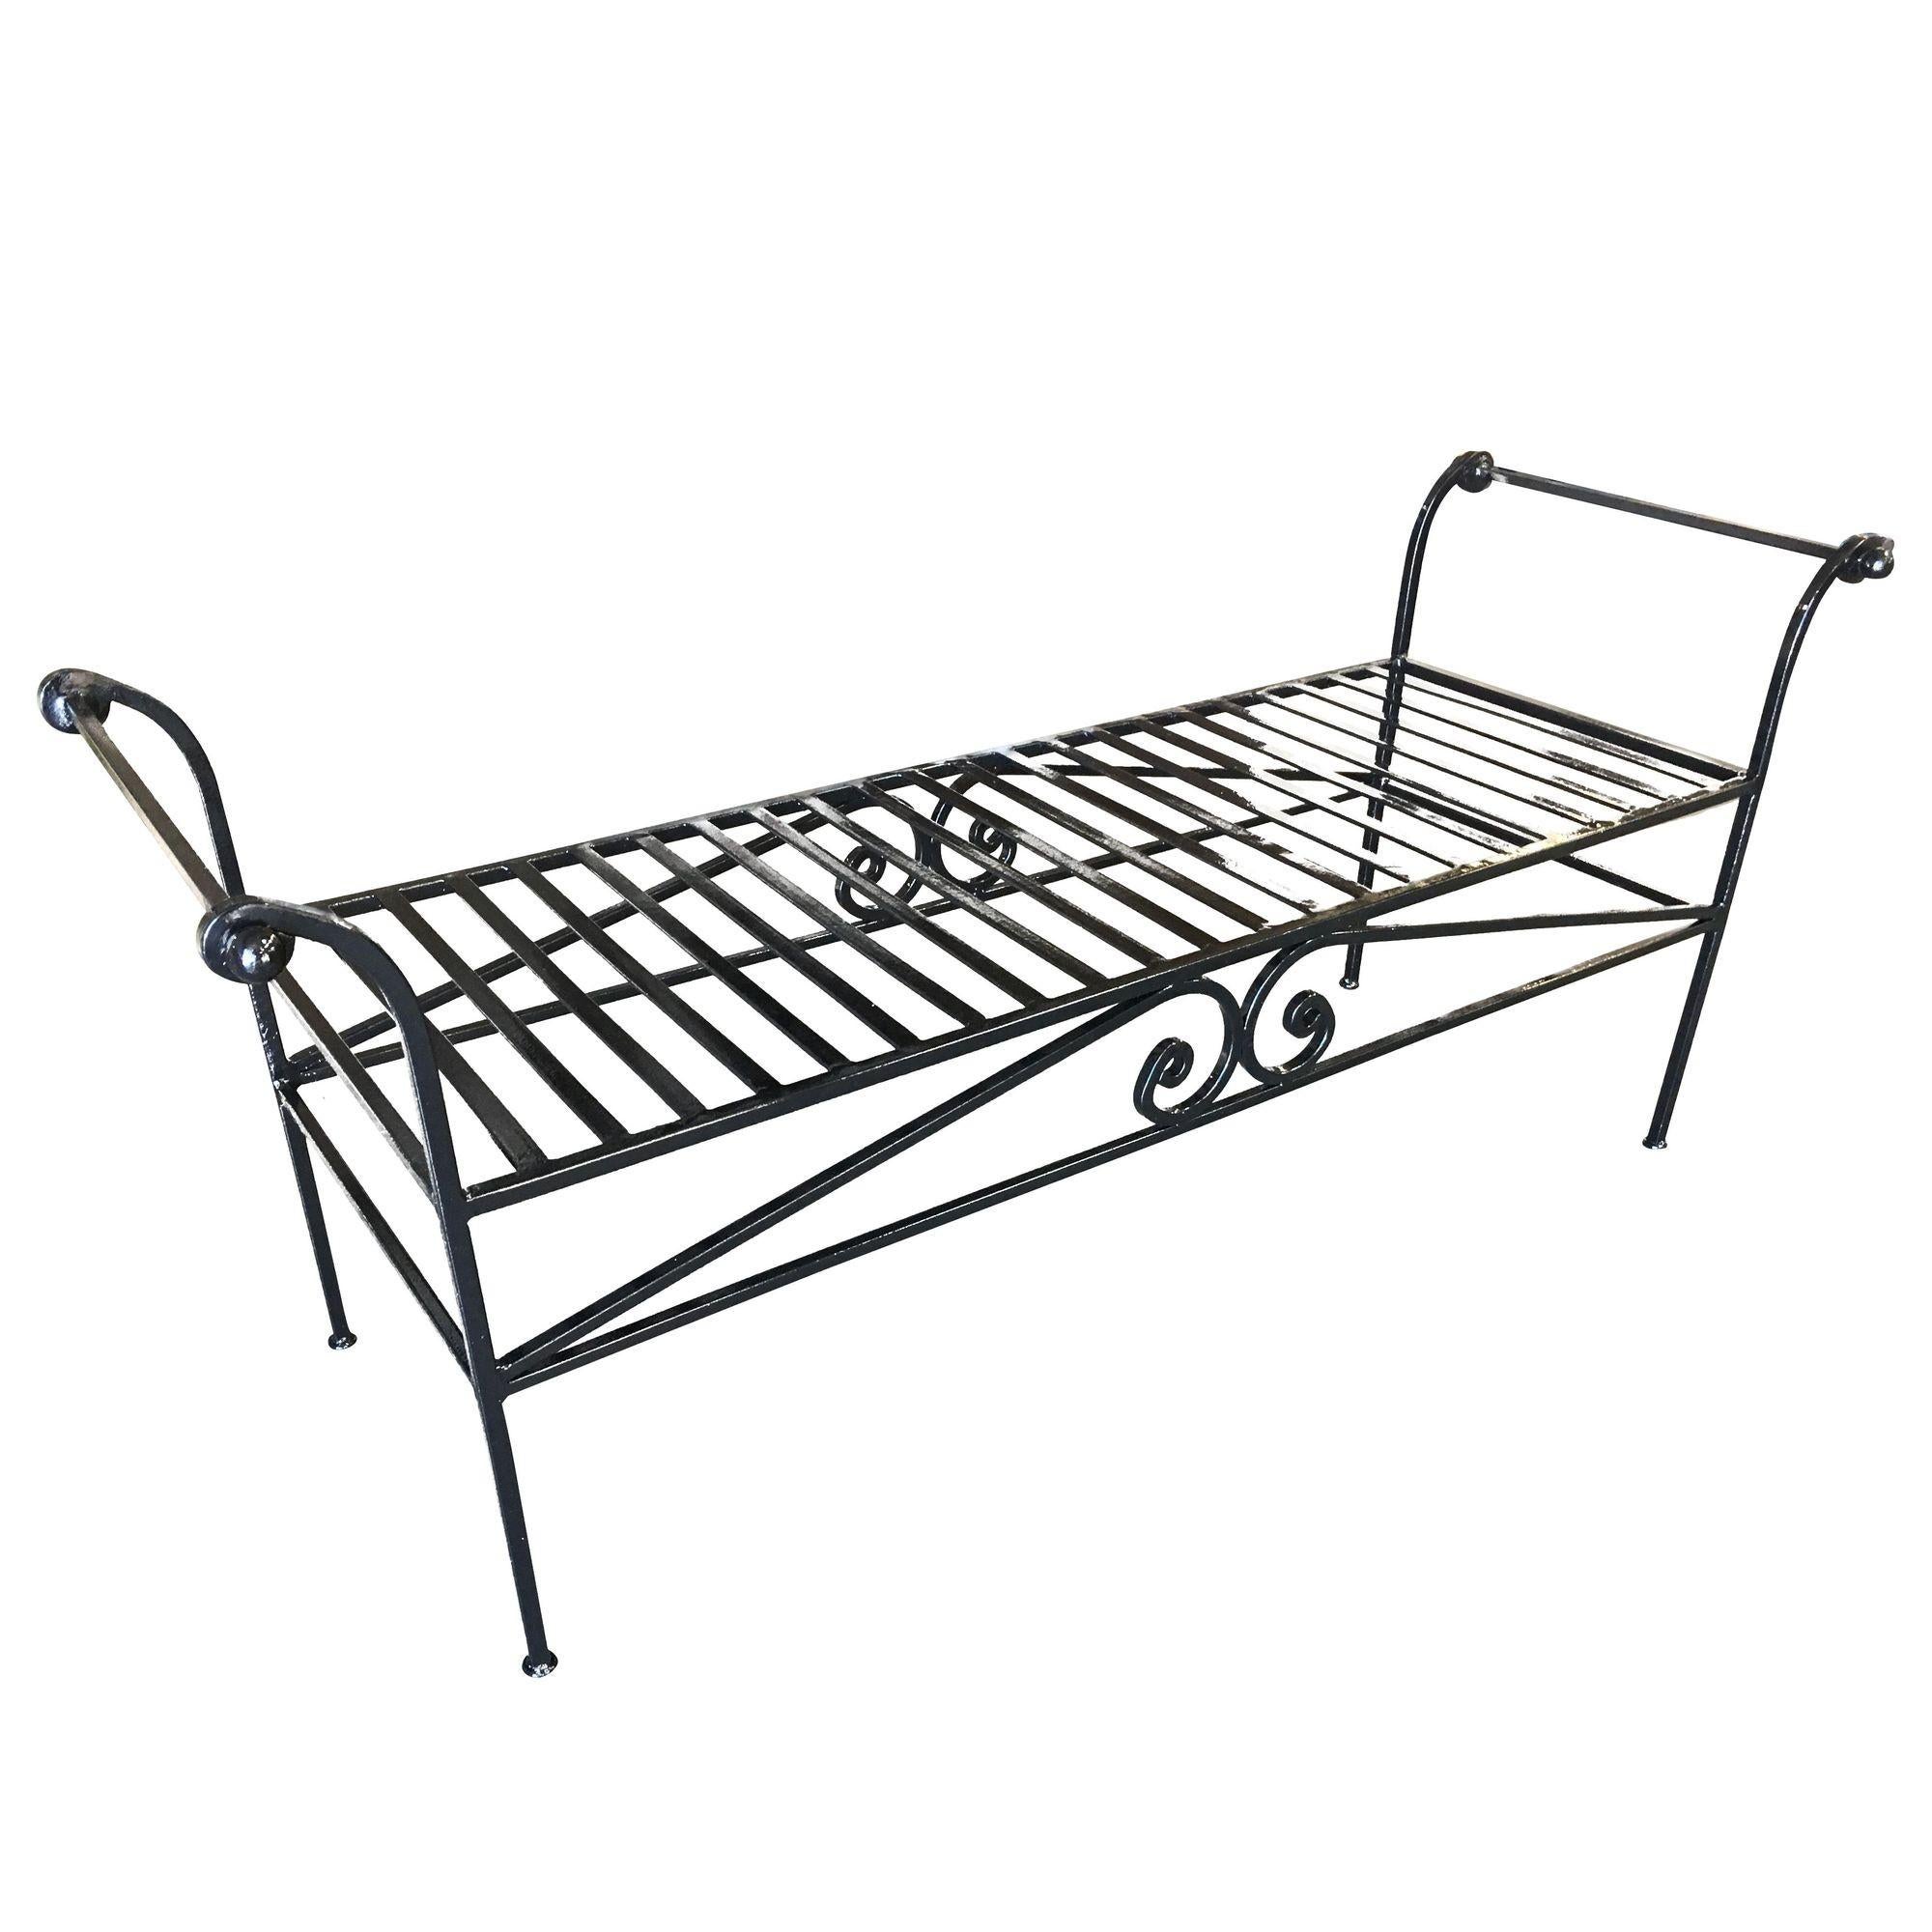 Scrolling Black Wrought Iron Chaise Lounge, Bench For Sale